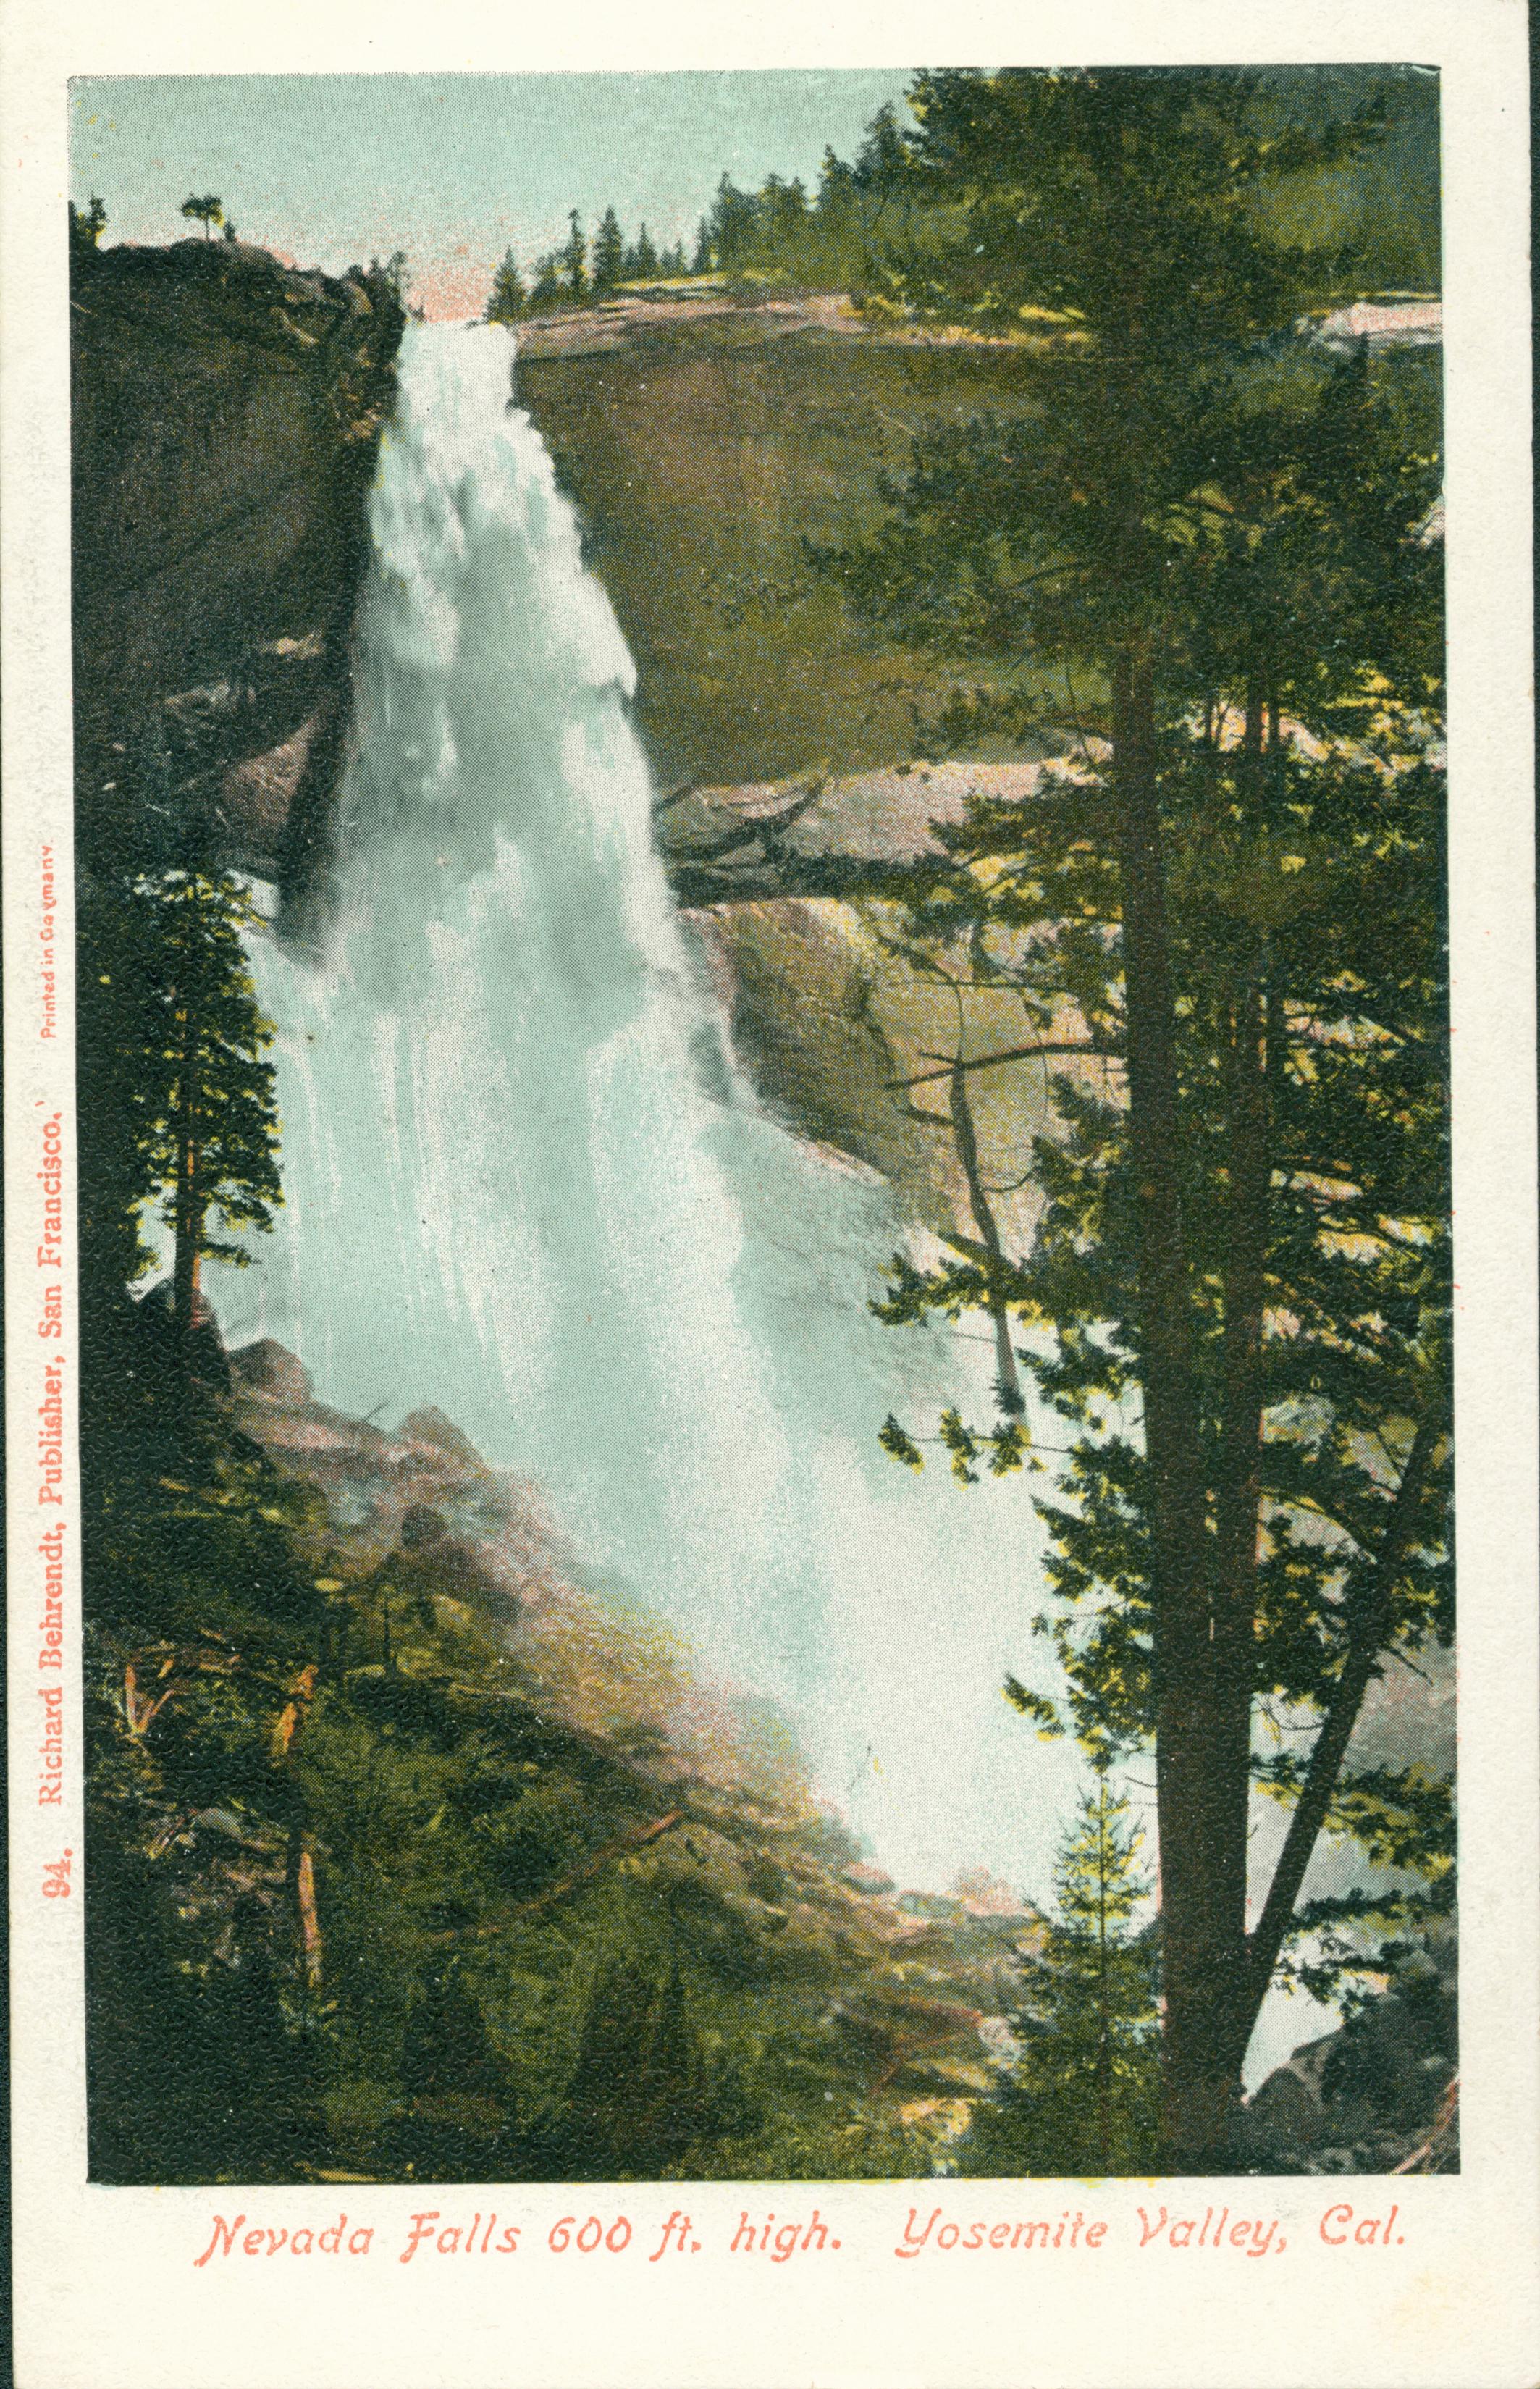 Shows a view of Nevada Falls